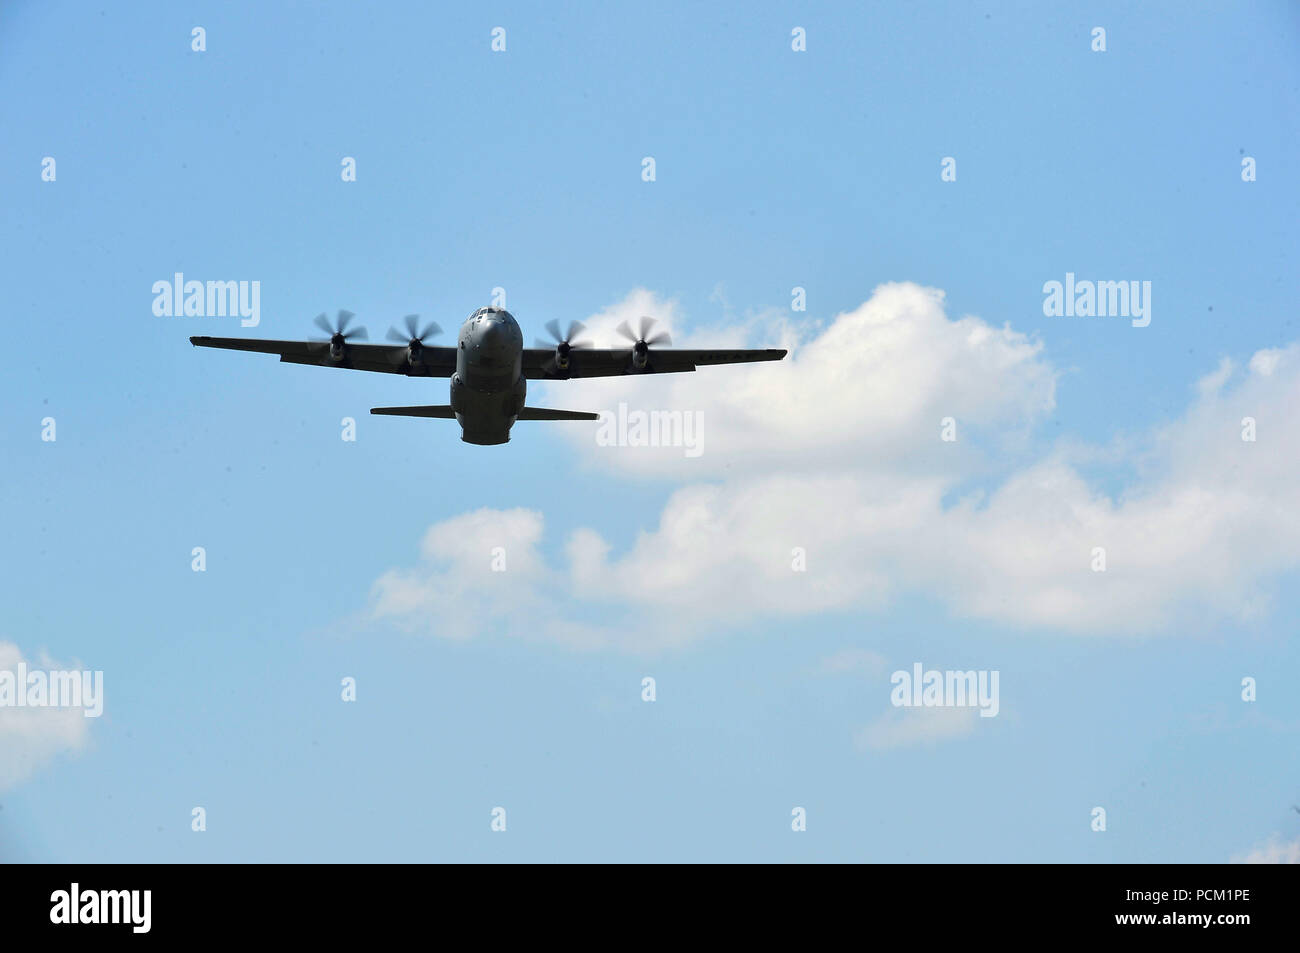 A U.S. Air Force C-130J Super Hercules assigned to the 86th Airlift Wing flies over Powidz Air Base, Poland, July 31, 2018, during a training exercise. U.S. Airmen and Soldiers arrived in Poland to conduct tactical airlift training and with the Polish armed forces. (U.S. Air Force photo by Senior Airman Joshua Magbanua) Stock Photo